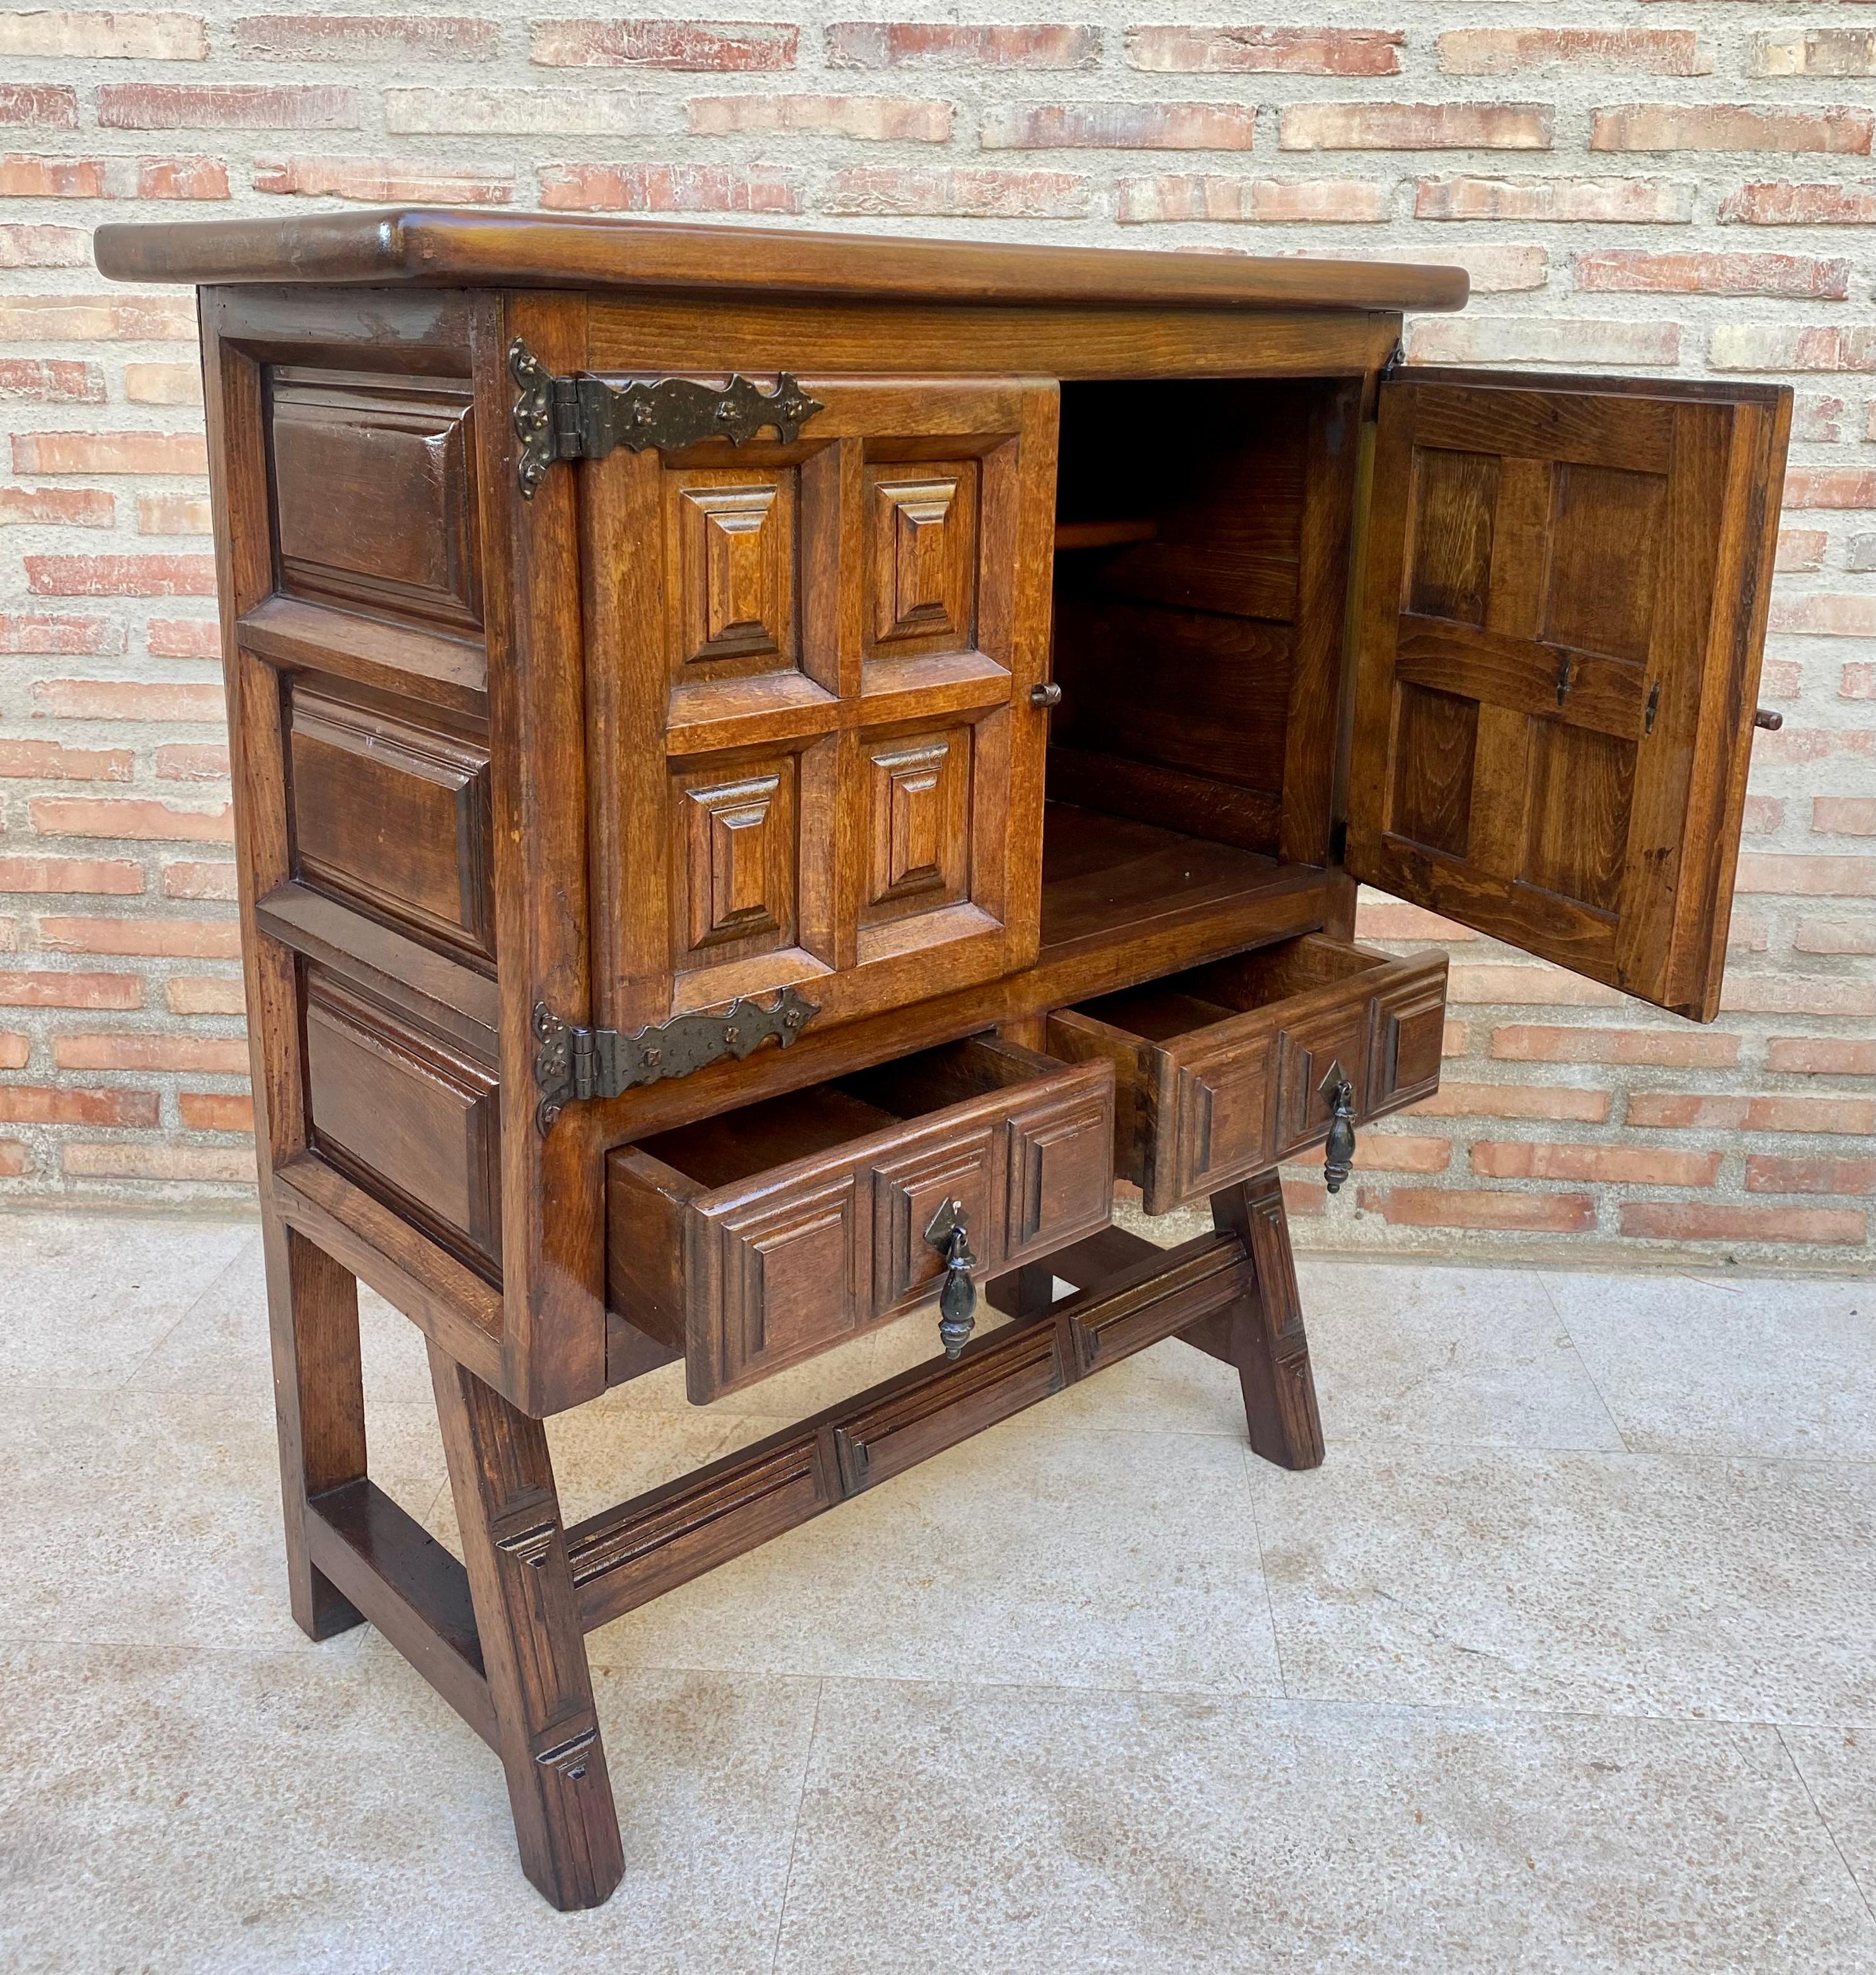 Mid-20th Century Spanish Baroque Chest of Drawers in Carved Walnut, 1940s For Sale